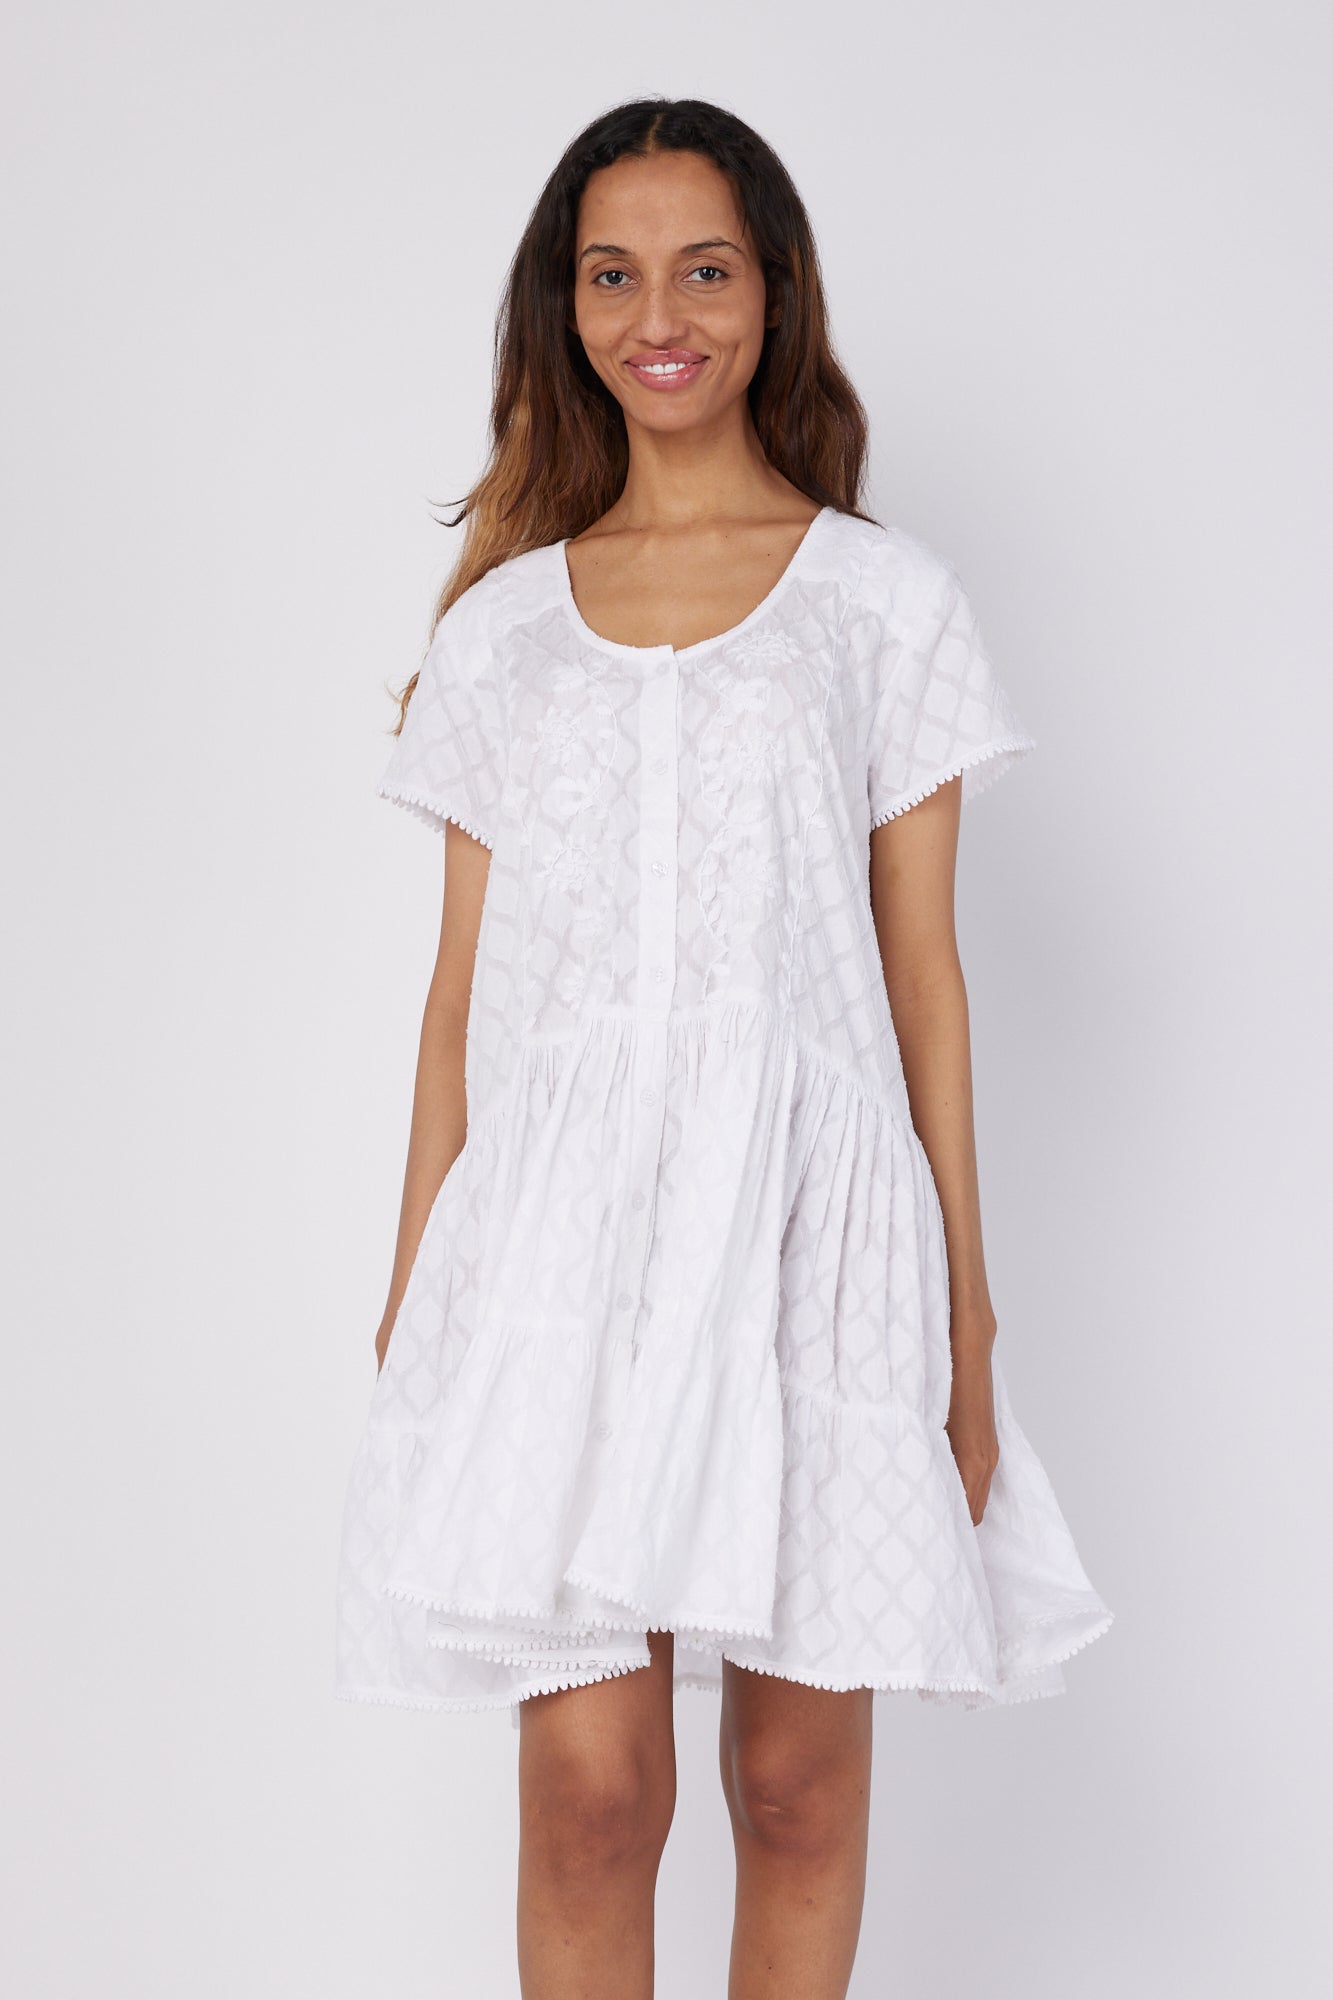 ModaPosa Simonetta Cap Sleeve Scoop Neck Drop Waist Hand Embroidered Jacquard Knee Length Dress in White . Discover women's resort dresses and lifestyle clothing inspired by the Mediterranean. Free worldwide shipping available!